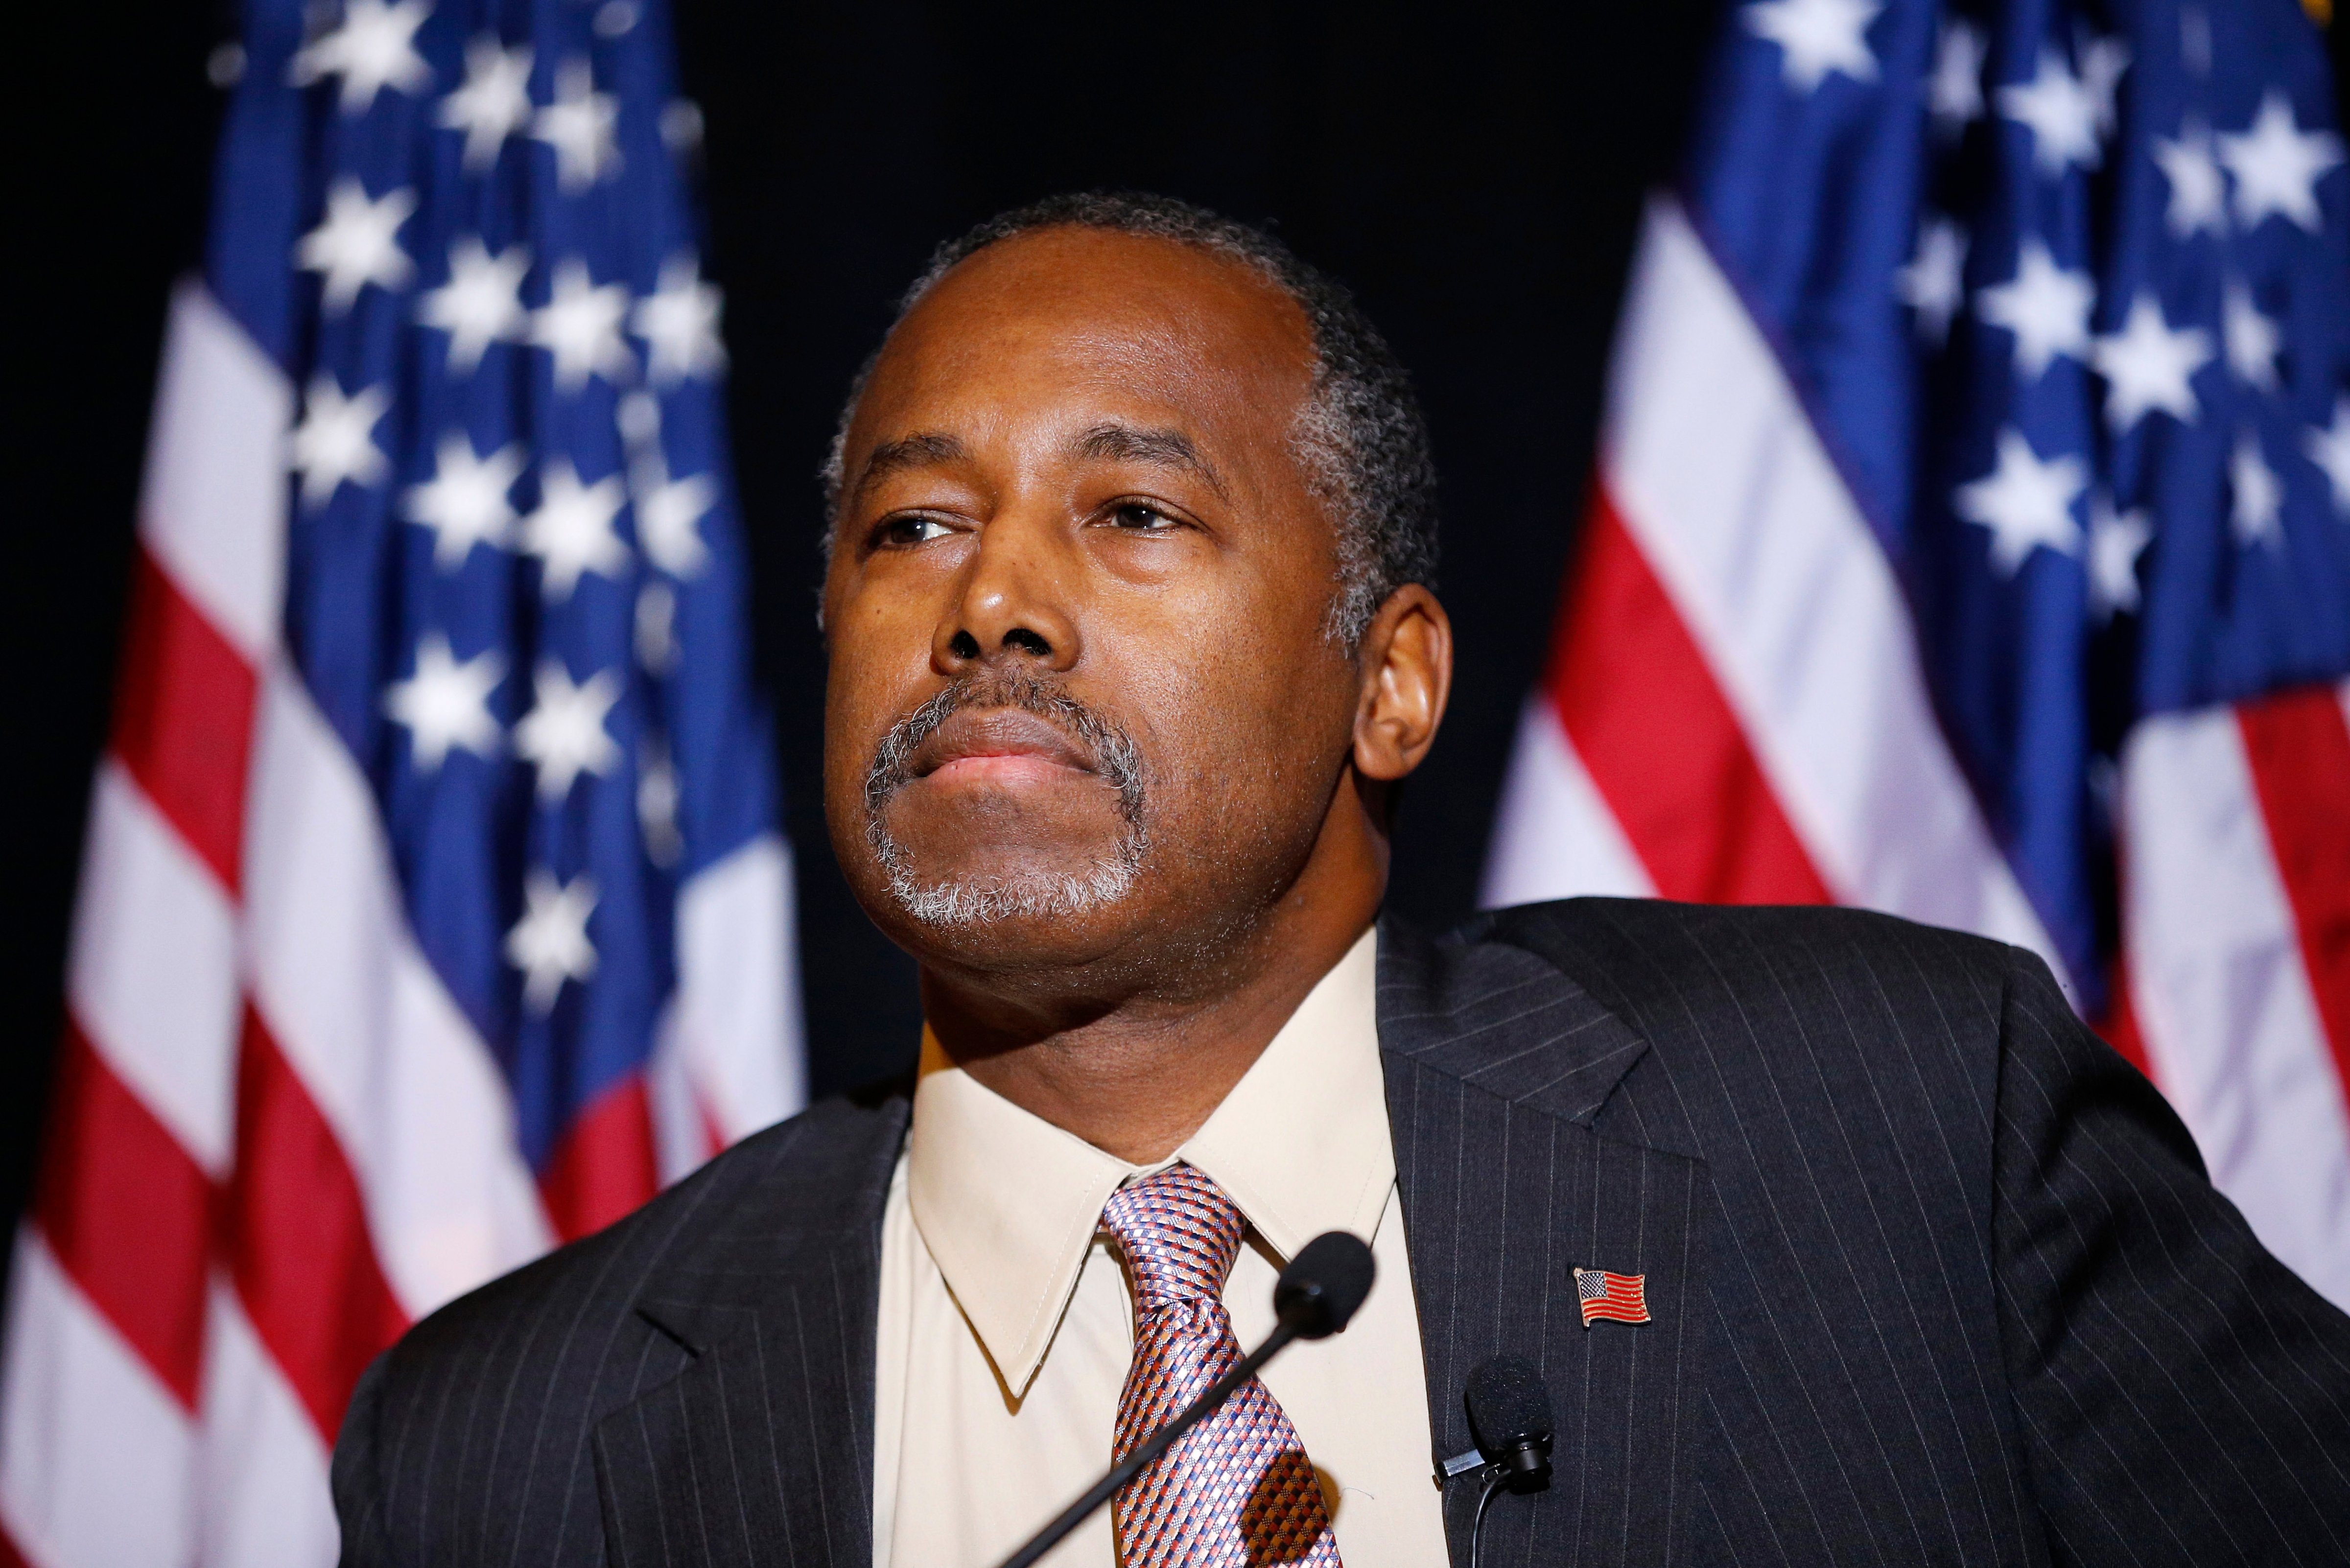 Dr. Ben Carson at a news conference in Henderson, Nev. on  Nov. 16, 2015.